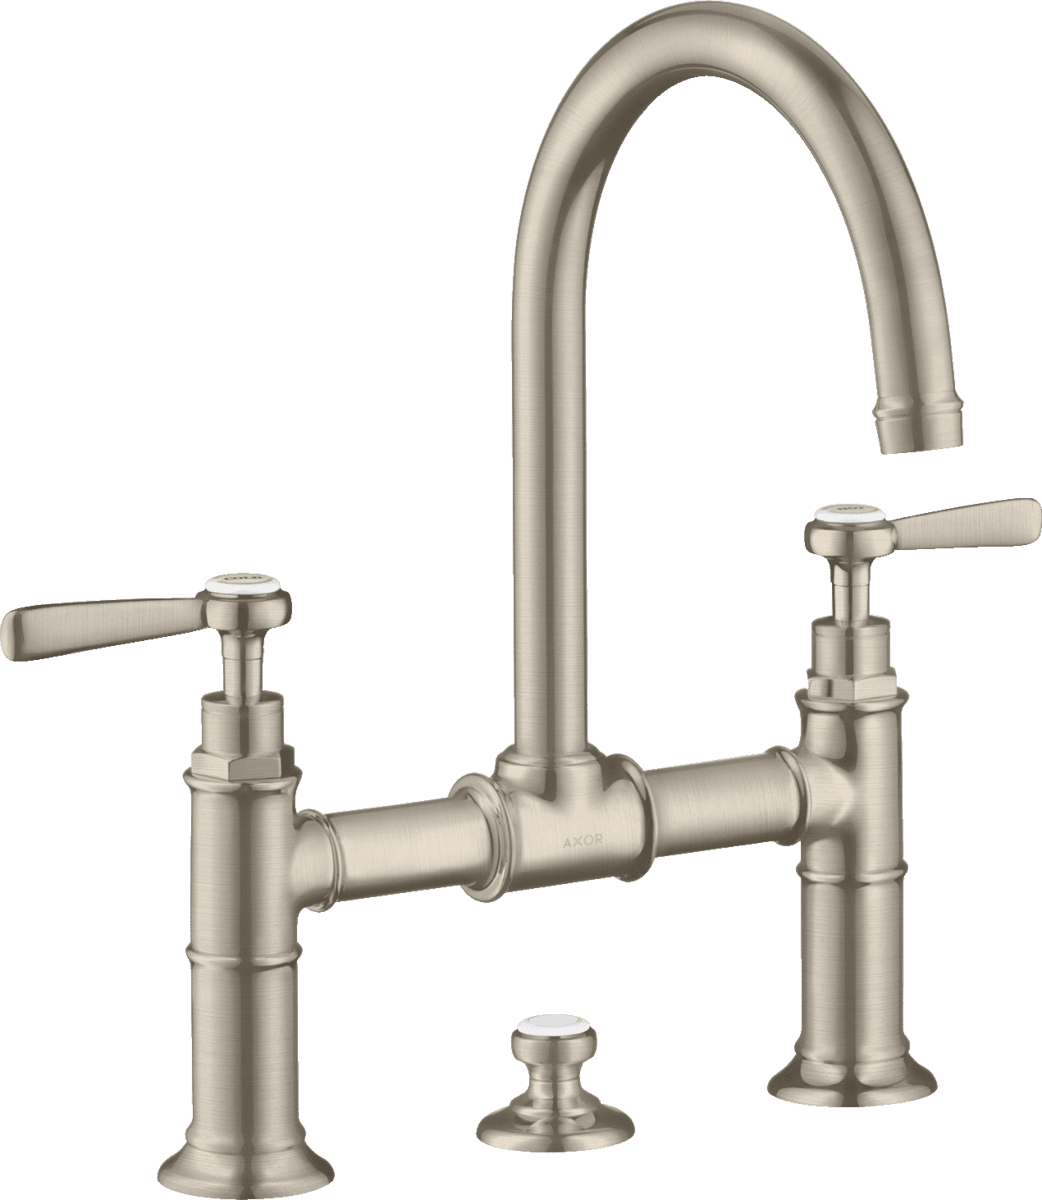 Picture of HANSGROHE AXOR Montreux 2-handle basin mixer 220 with lever handles and pop-up waste set #16511820 - Brushed Nickel